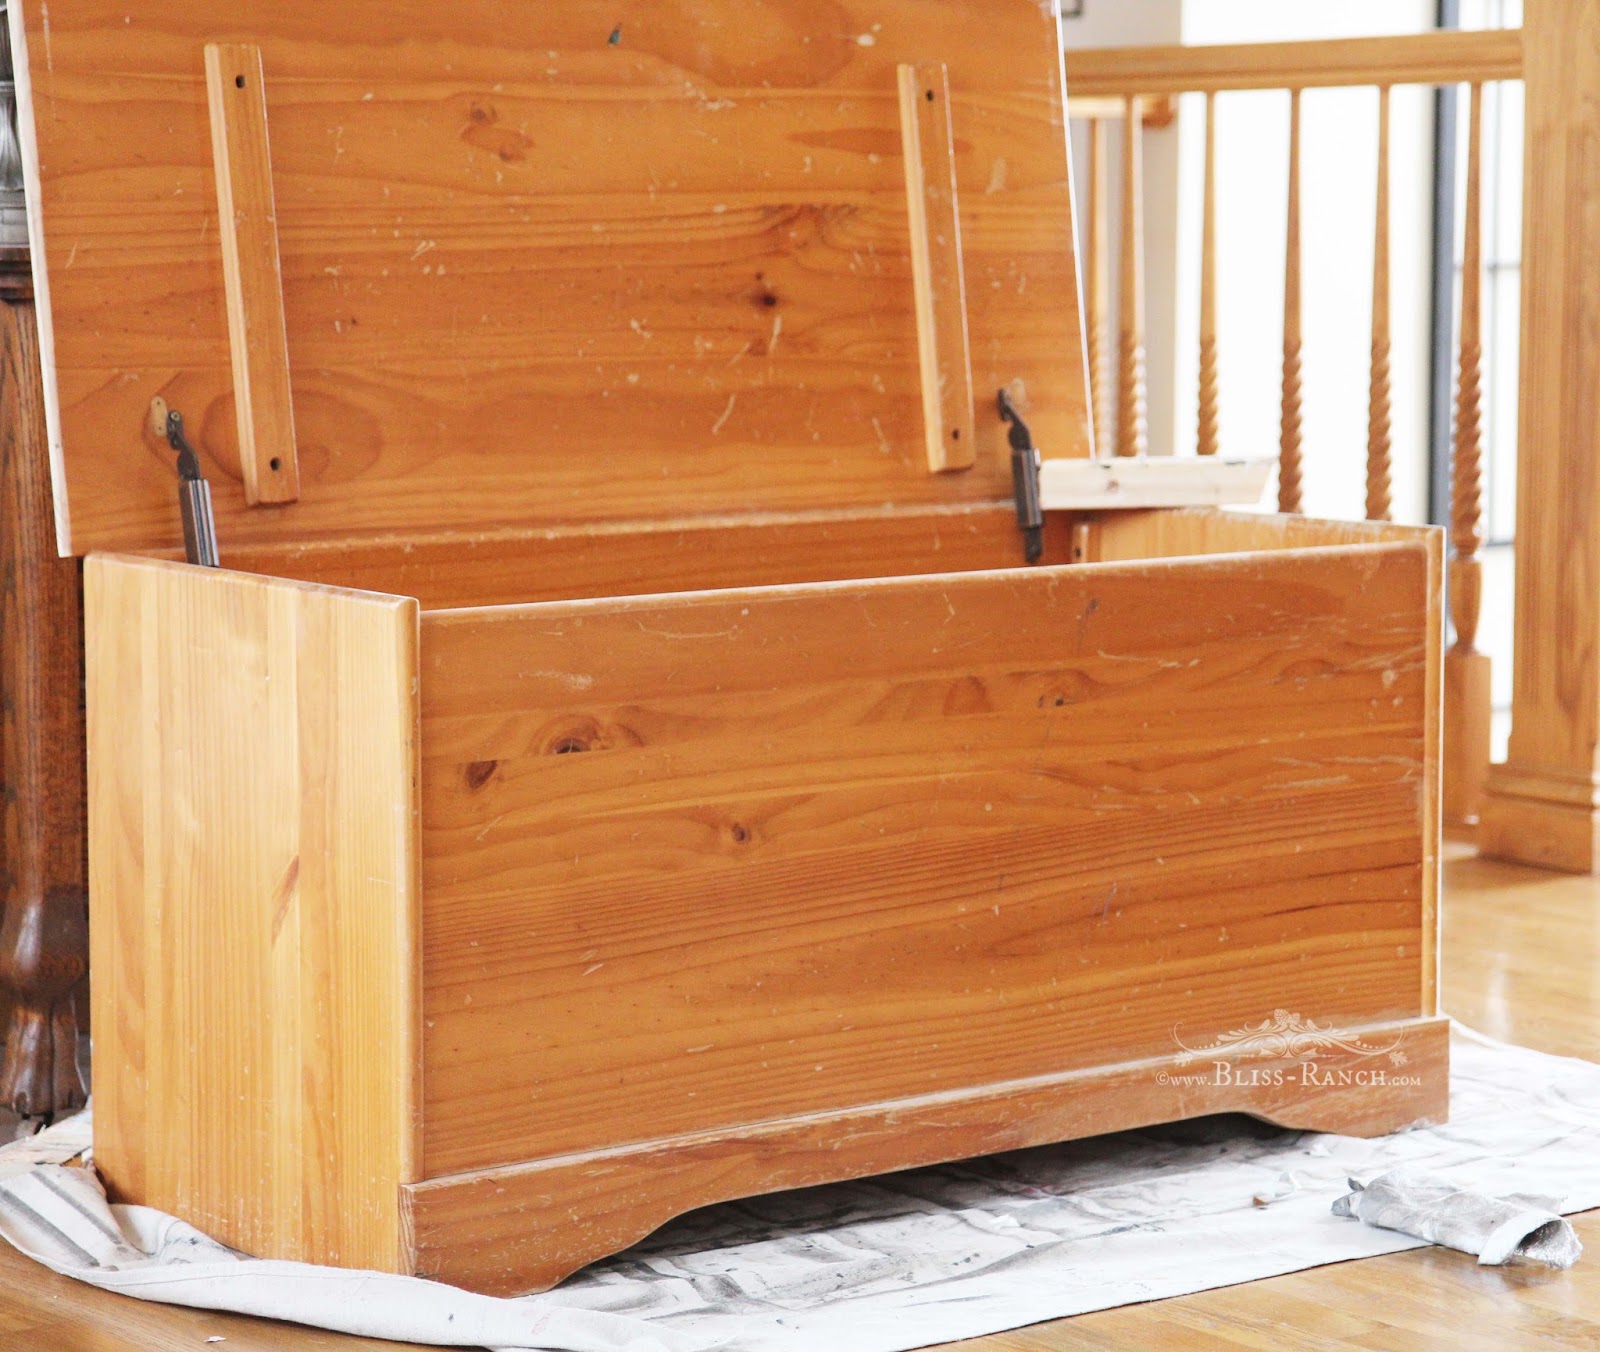 Pine Box Upcycle To Blanket Chest, Bliss-Ranch.com